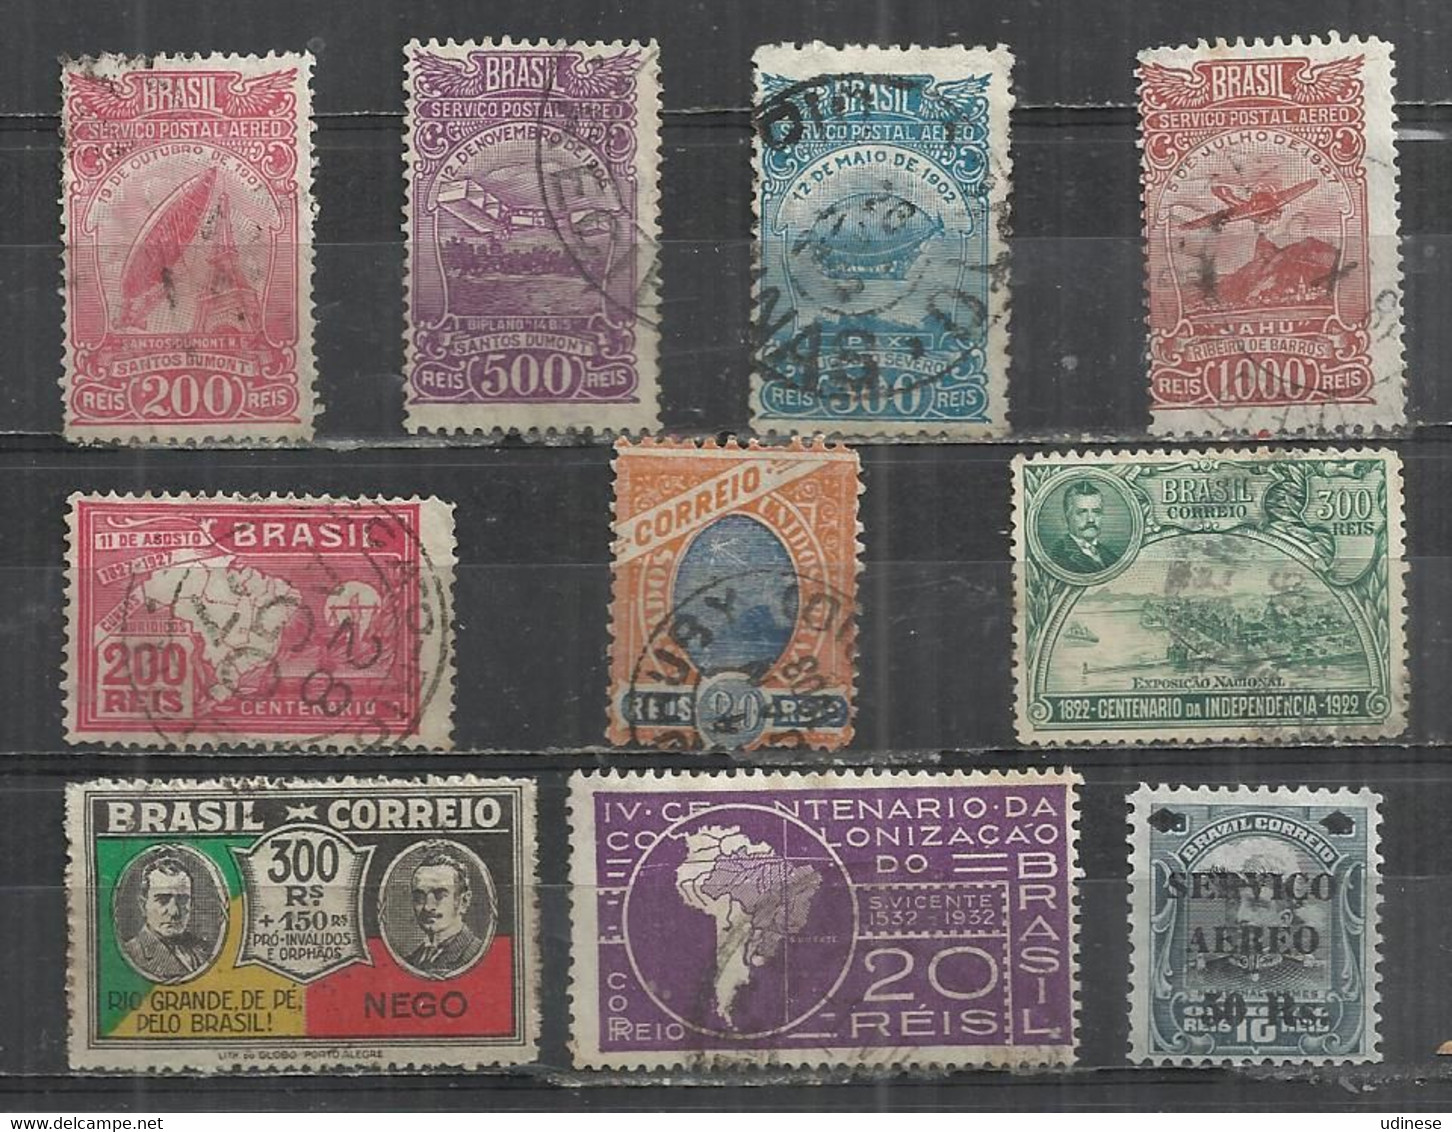 TEN AT A TIME - BRAZIL - VERY OLD EMISSIONS - LOT OF 10 DIFFERENT 21 - POSTALLY USED OBLITERE GESTEMPELT USADO - Lots & Serien